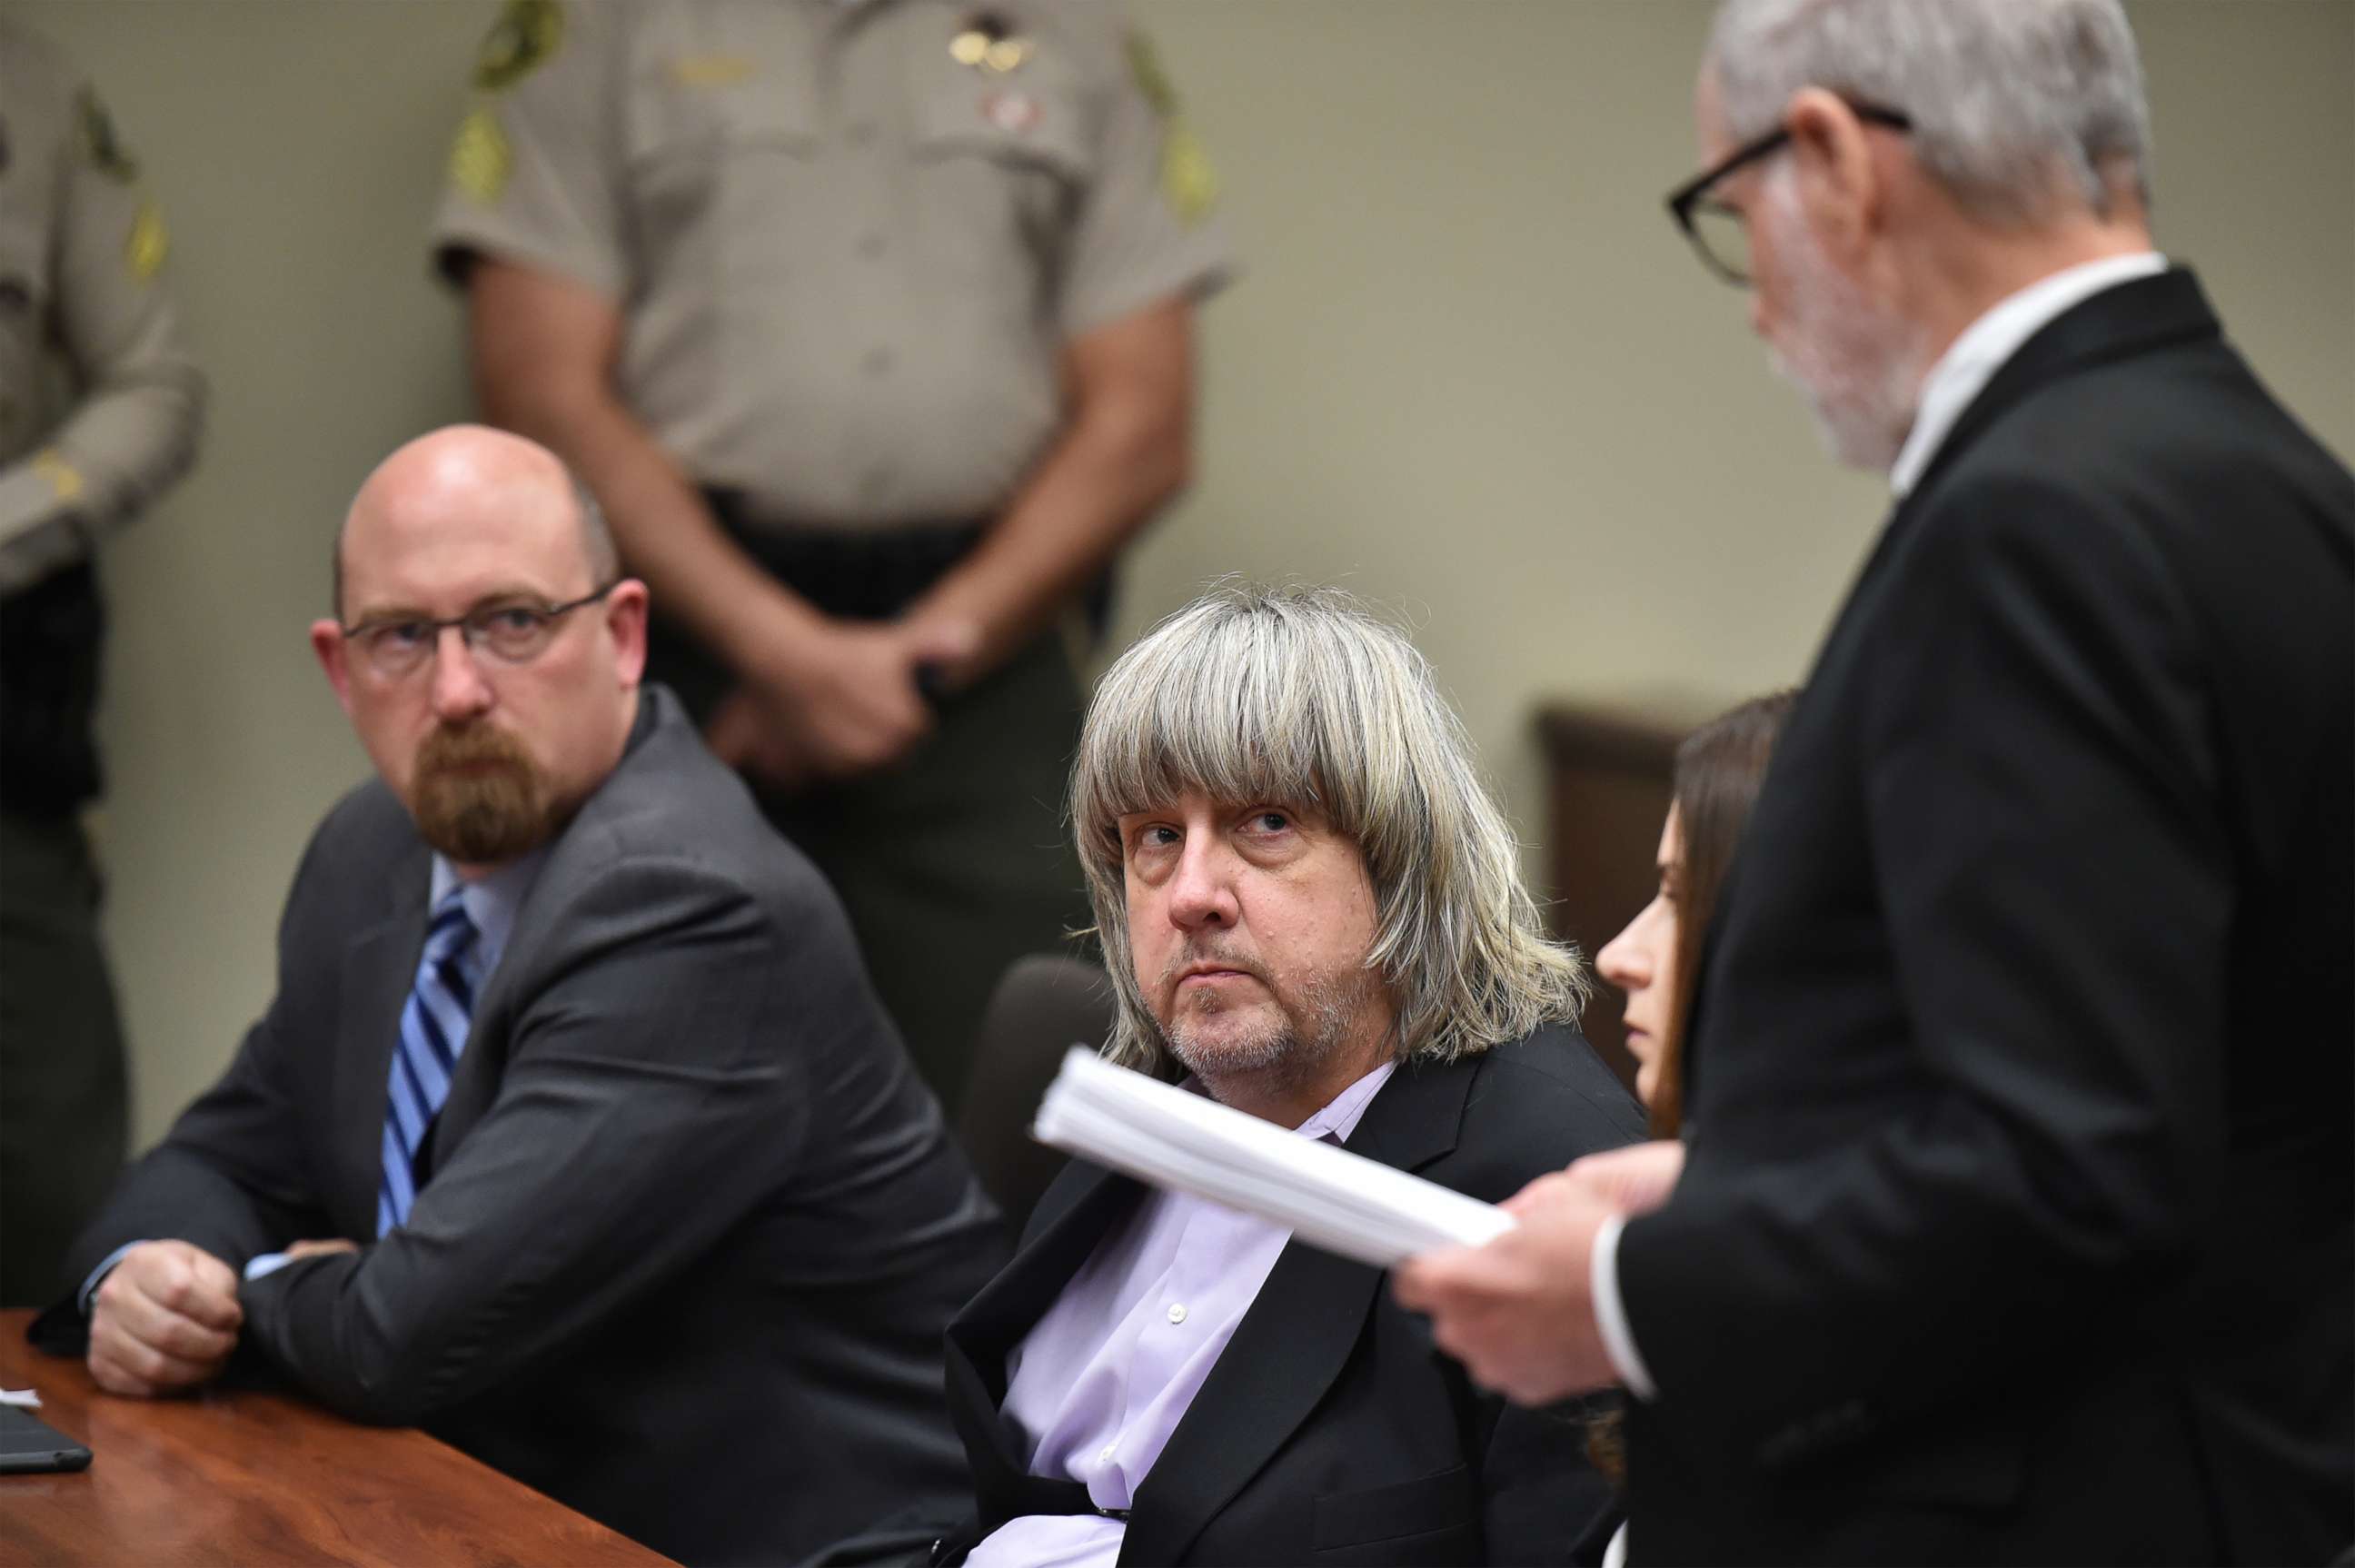 PHOTO: David Allen Turpin appears in court for arraignment with attorneys on Jan. 18, 2018 in Riverside, Calif.